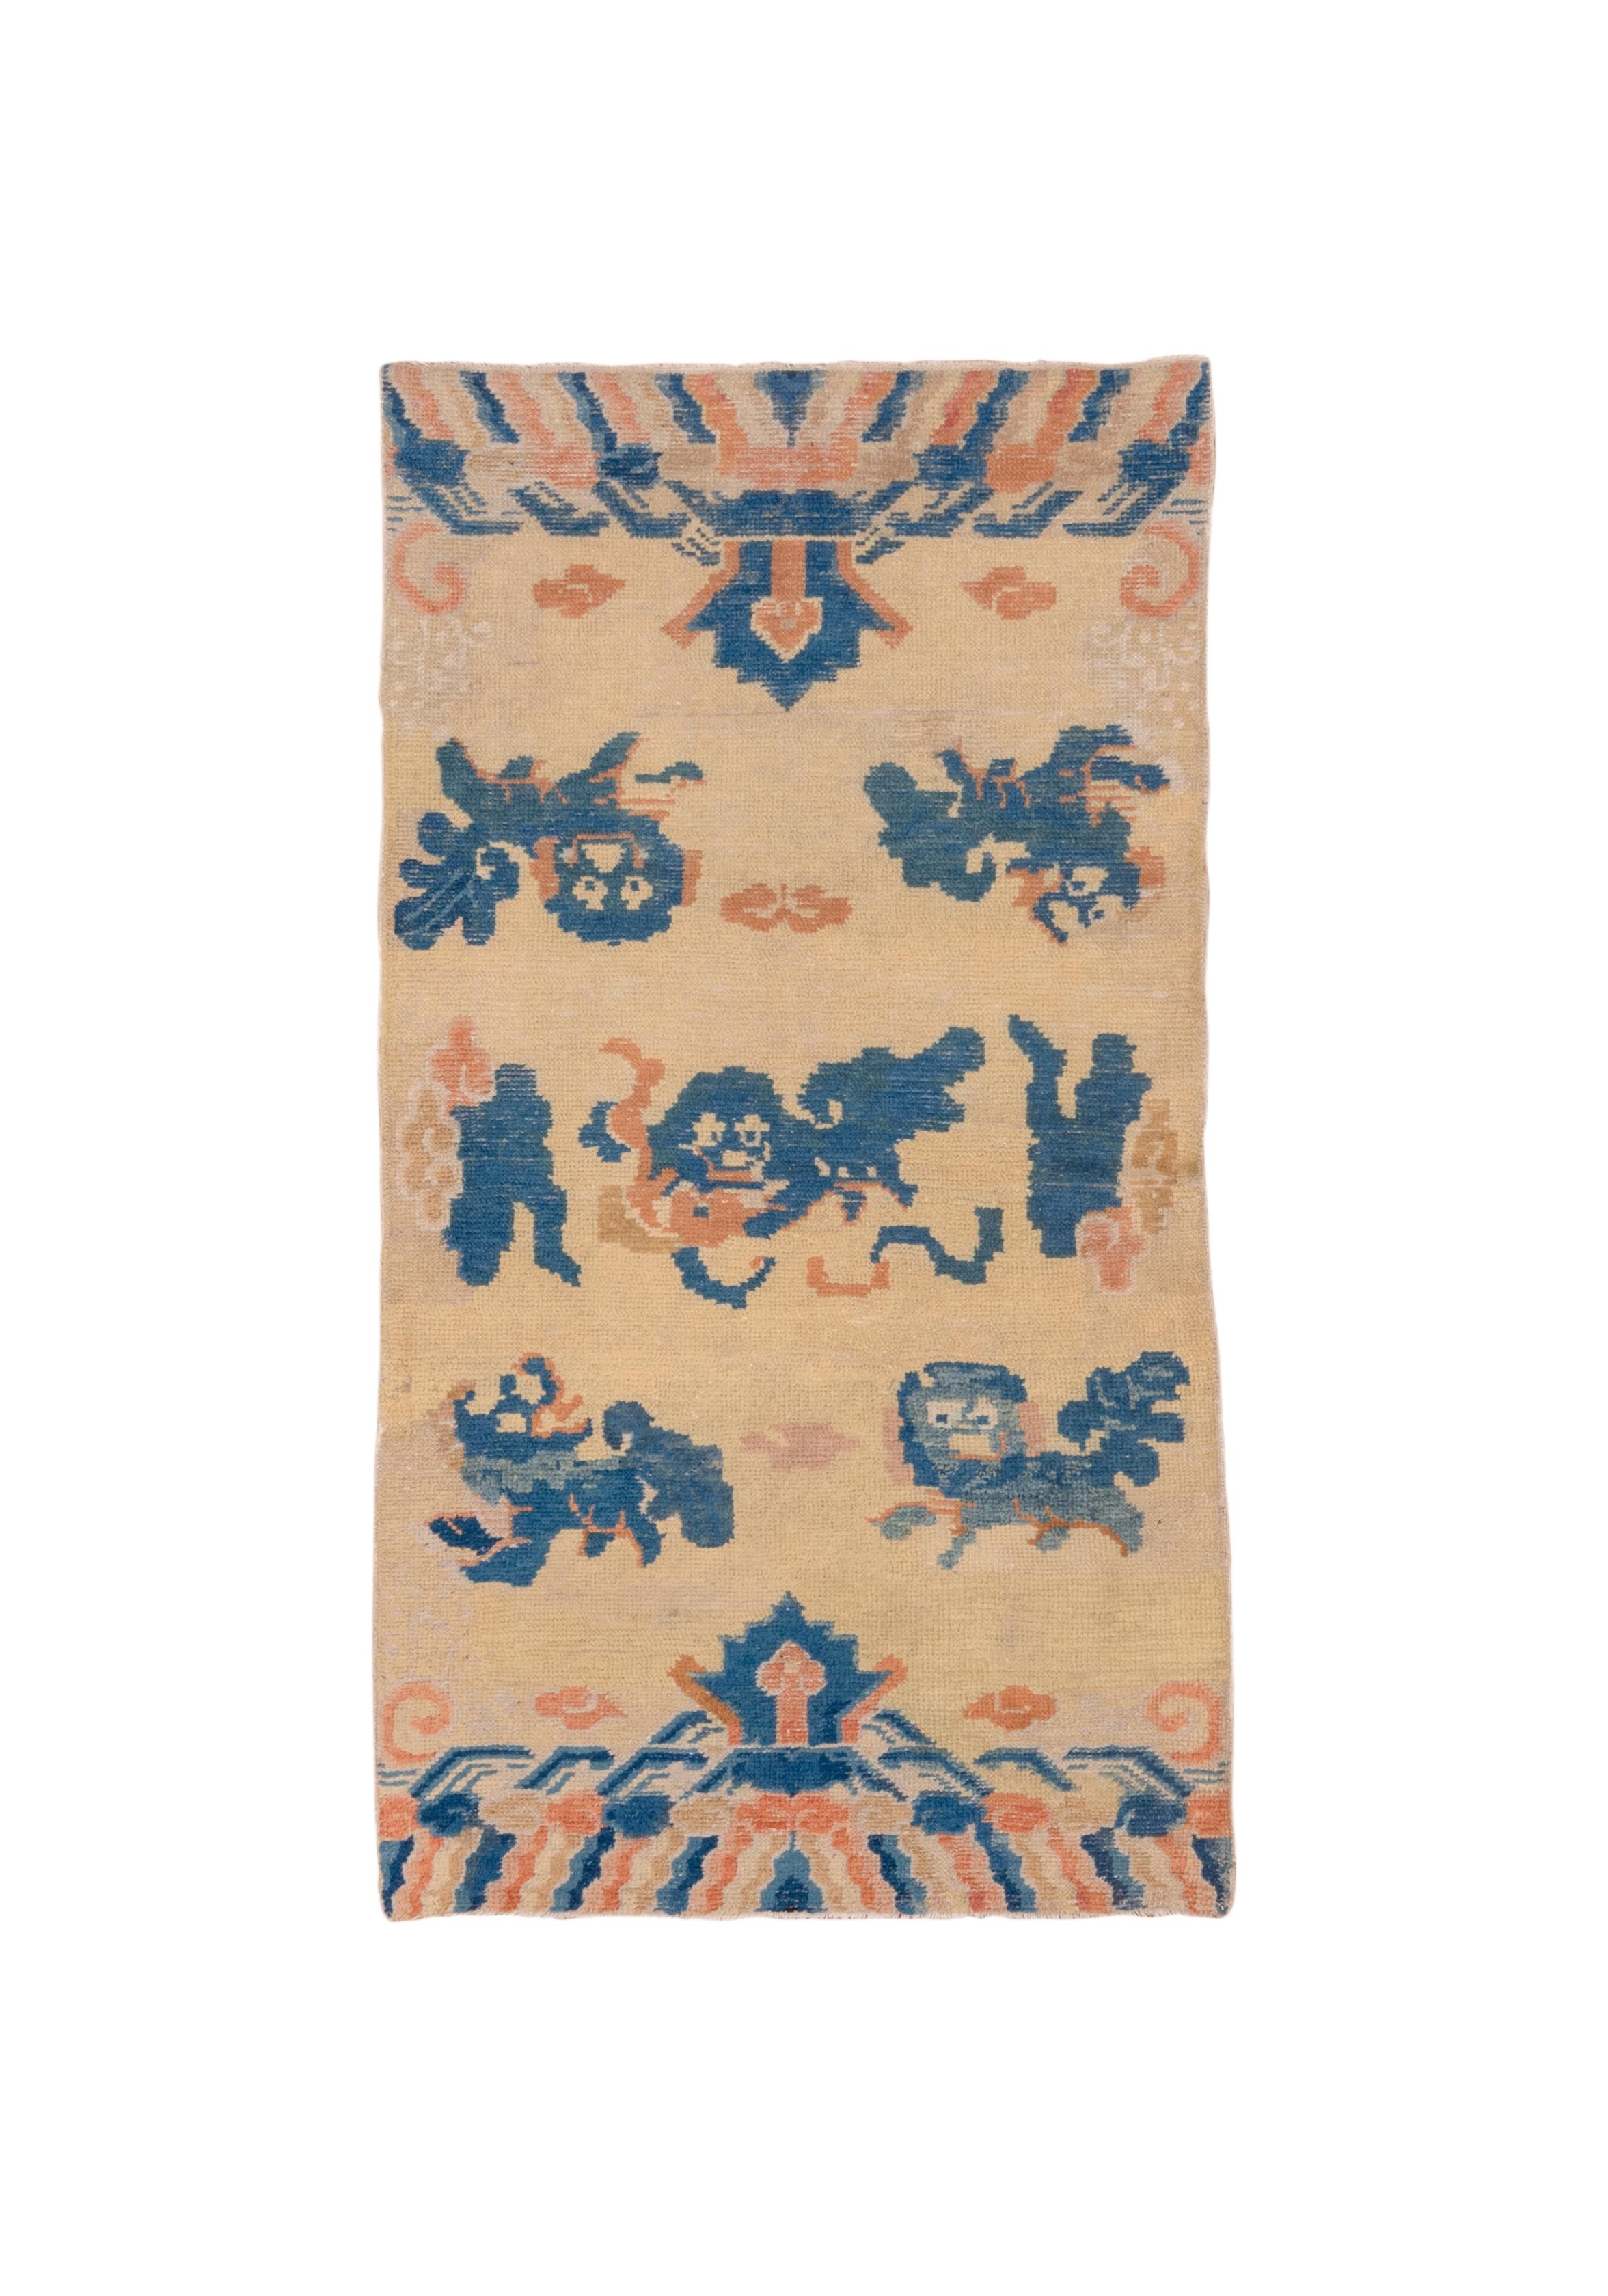 Five lion dogs cavort among clouds, with mountains and waves at the ends closing the composition.  Dark blue is the major accent tone. Five lion dogs have no specific reference, as opposed to nine, for example. Good condition, on cotton. Moderate